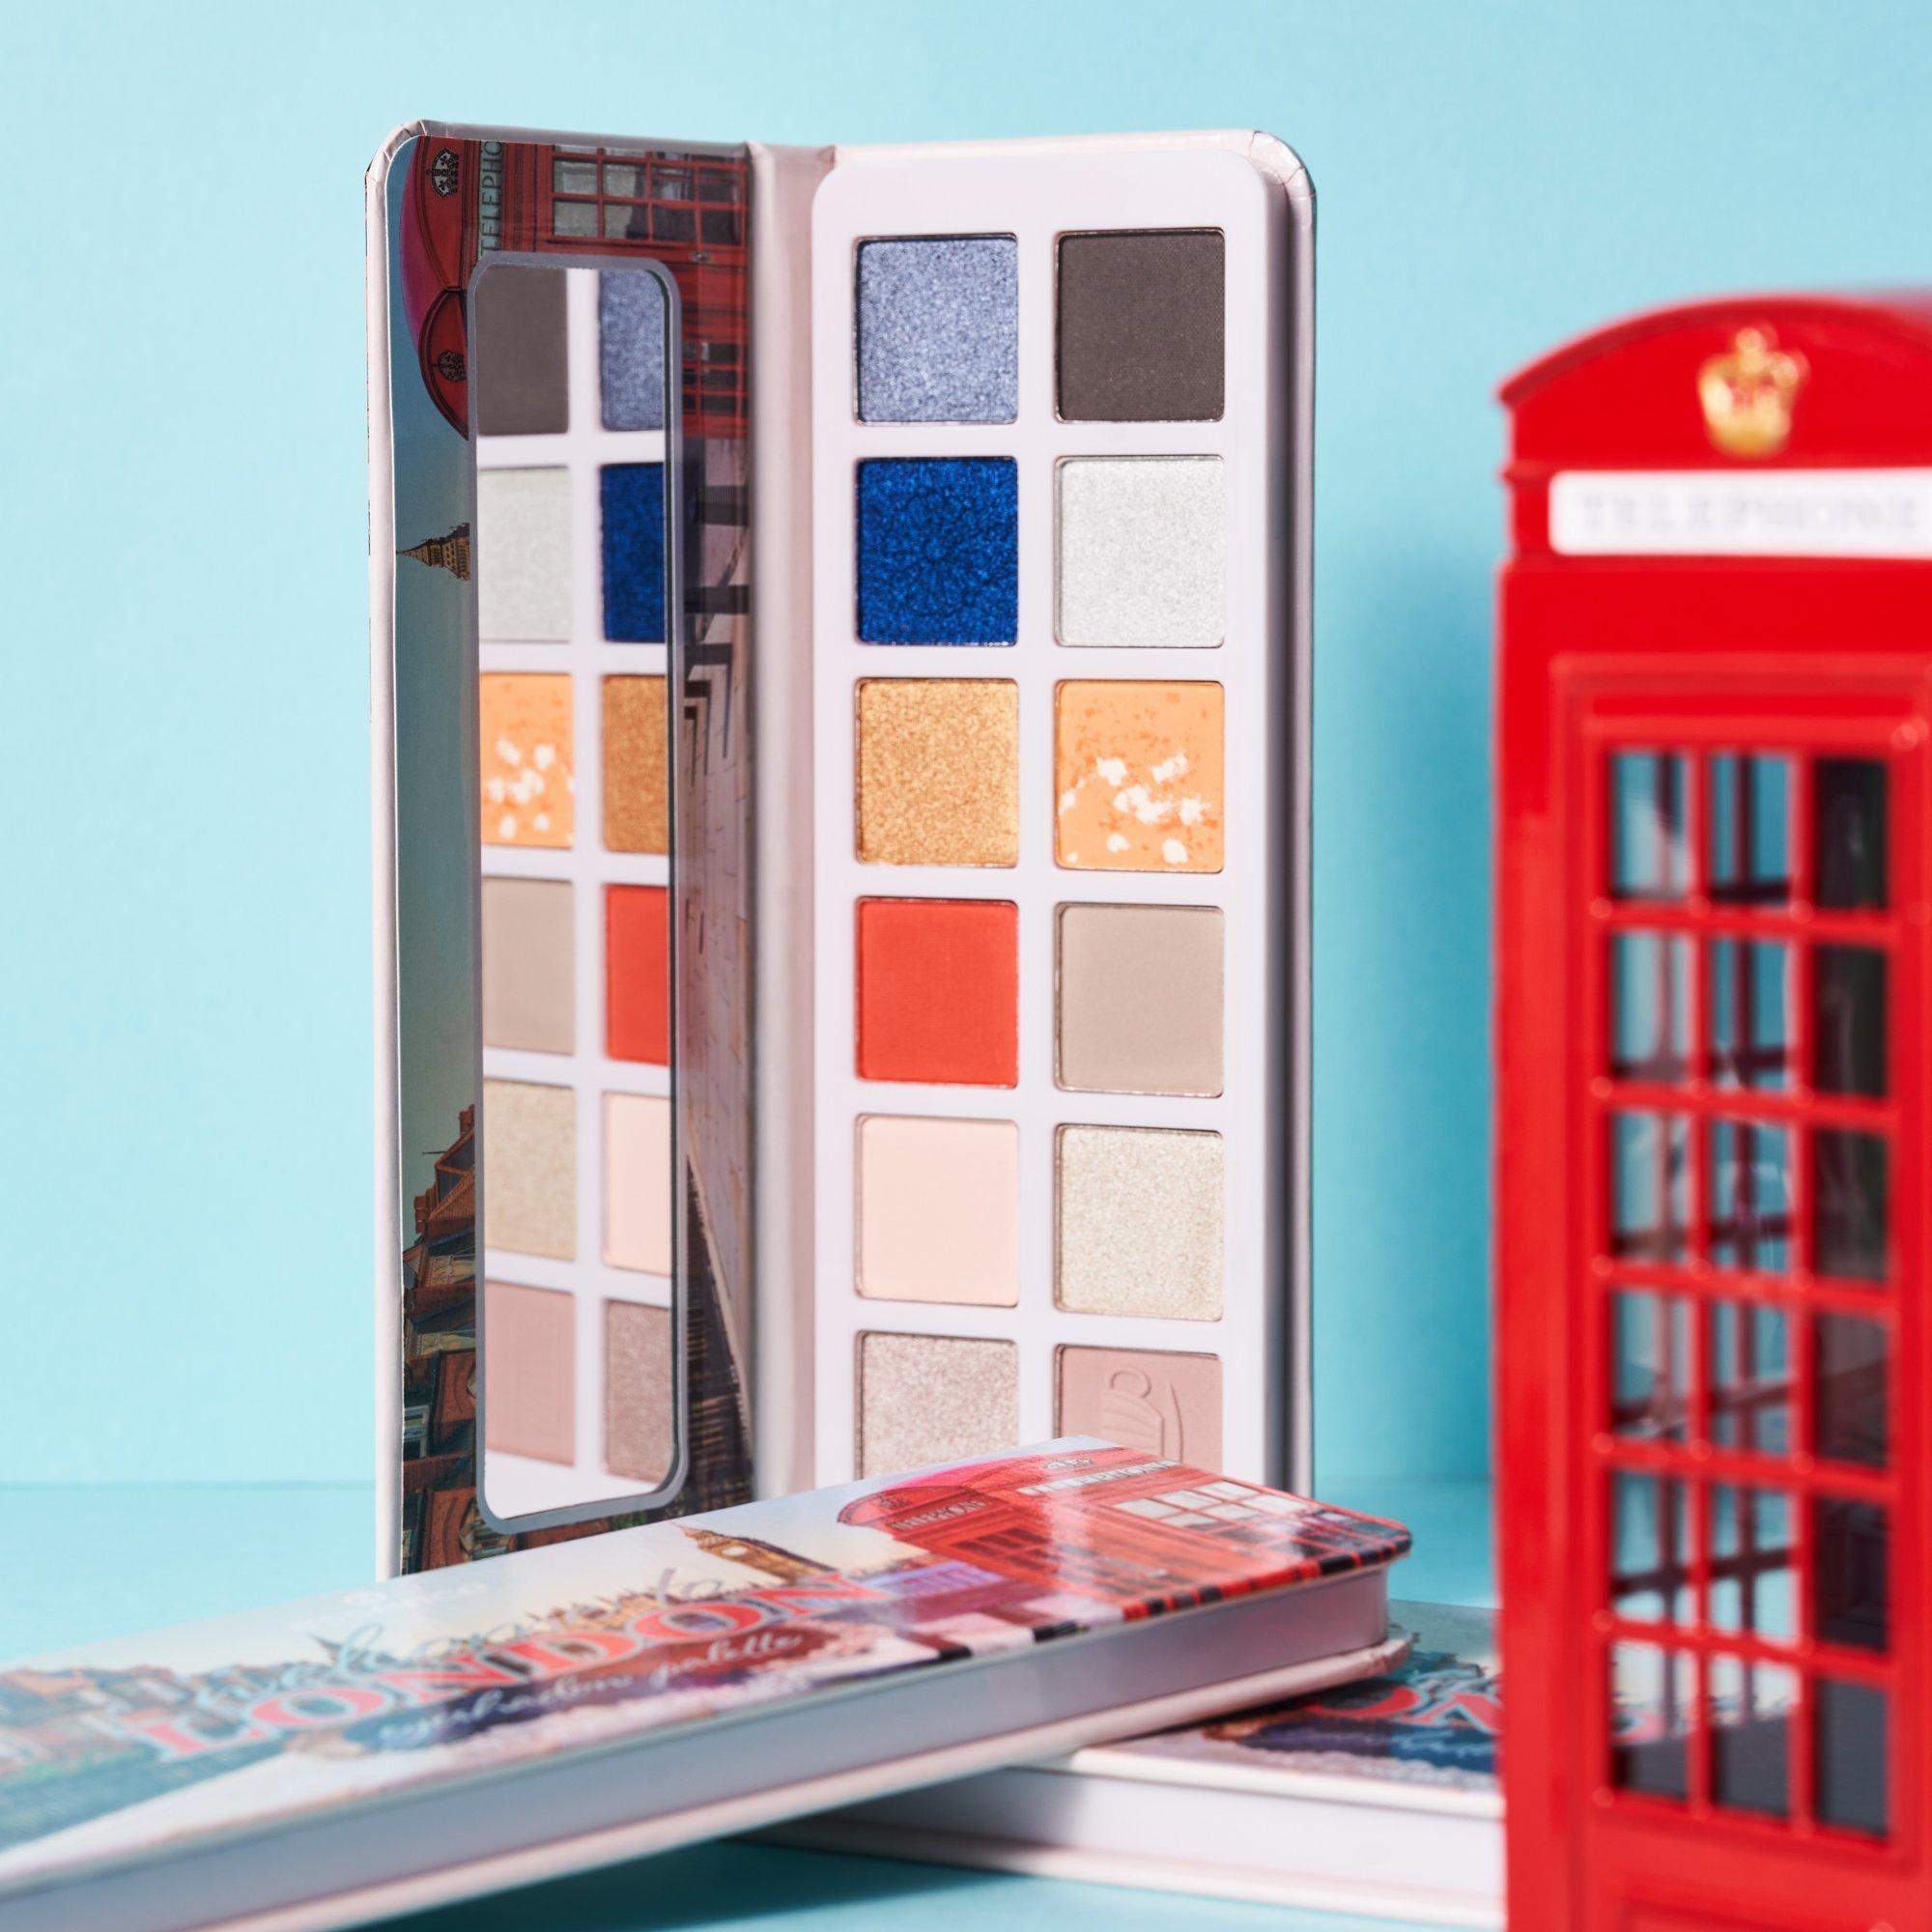 welcome to LONDON eyeshadow palette